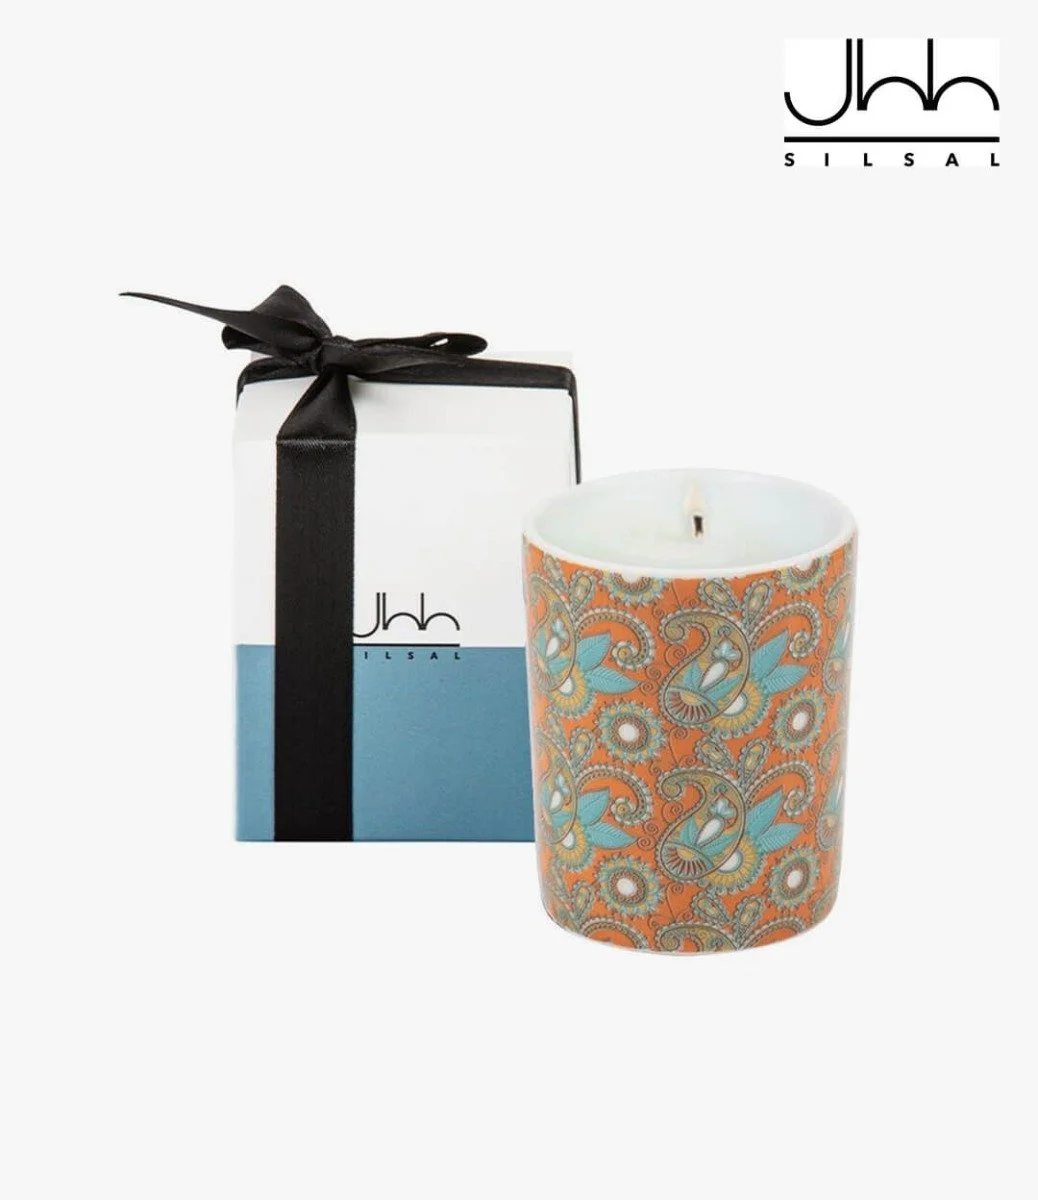 The Delhi Candle - 60g By Silsal*